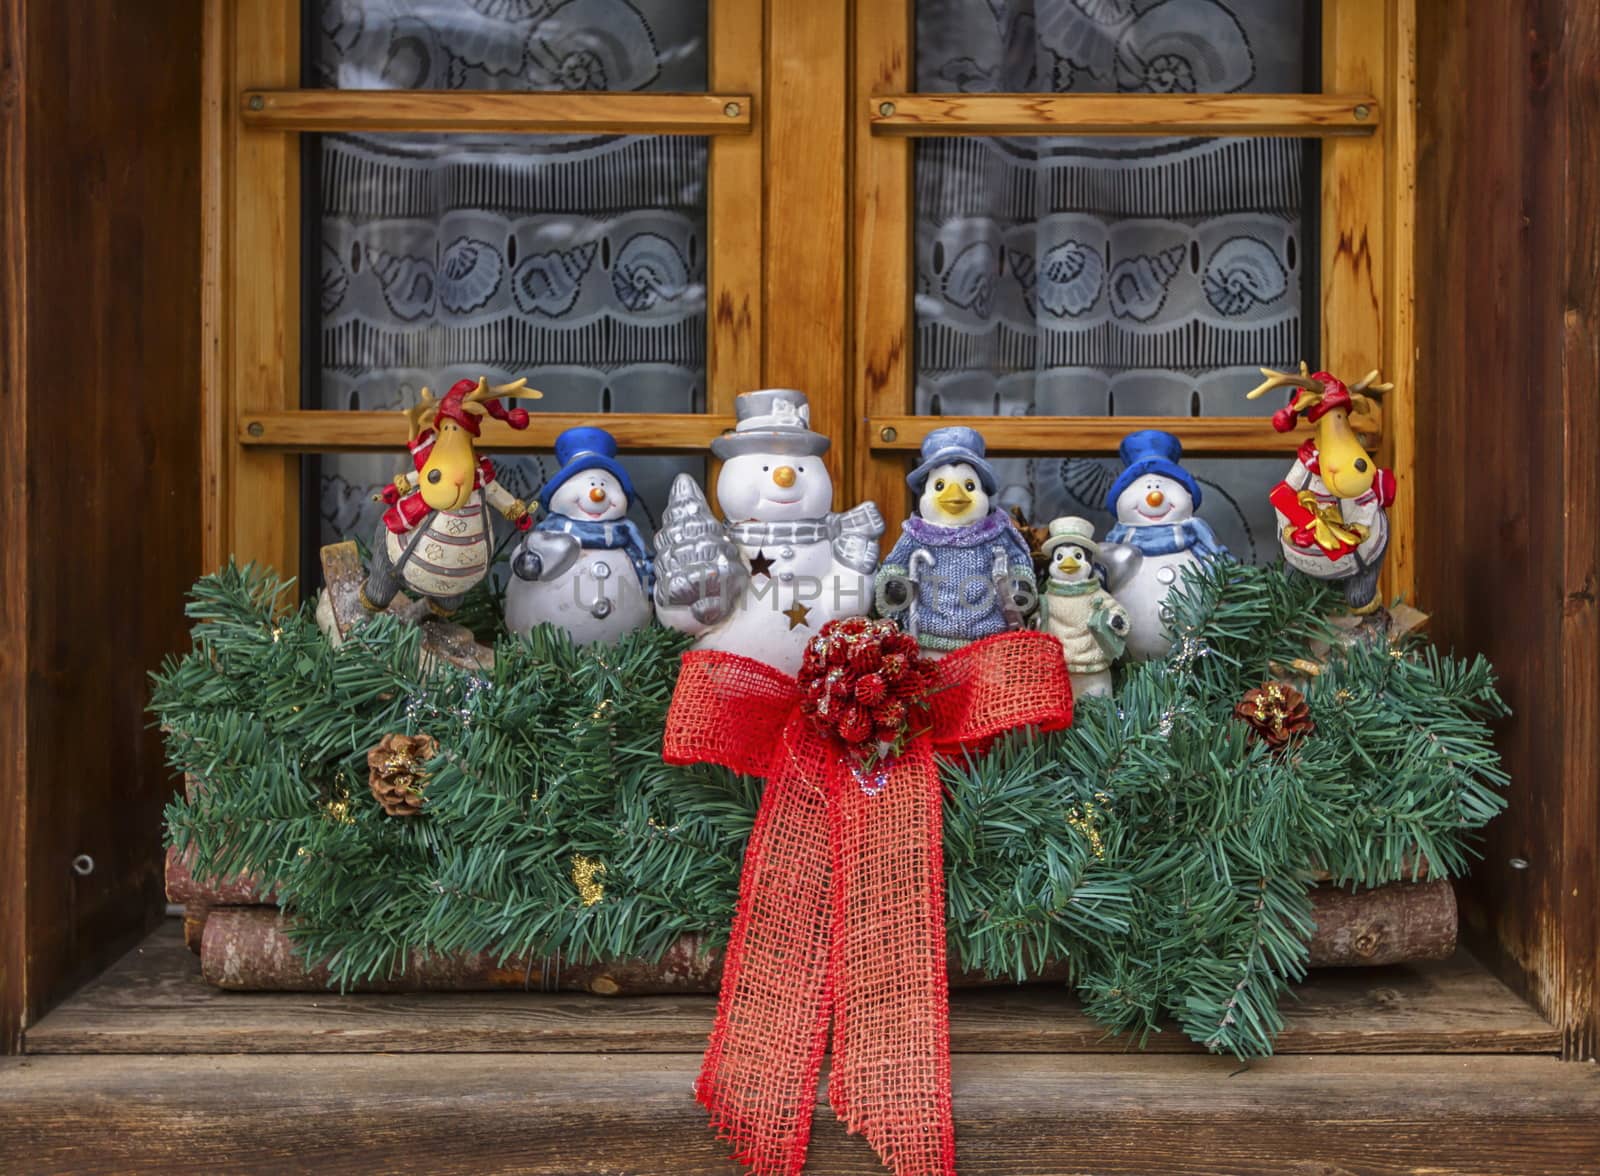 Cute Christmas decoration dolls at the window made of wood